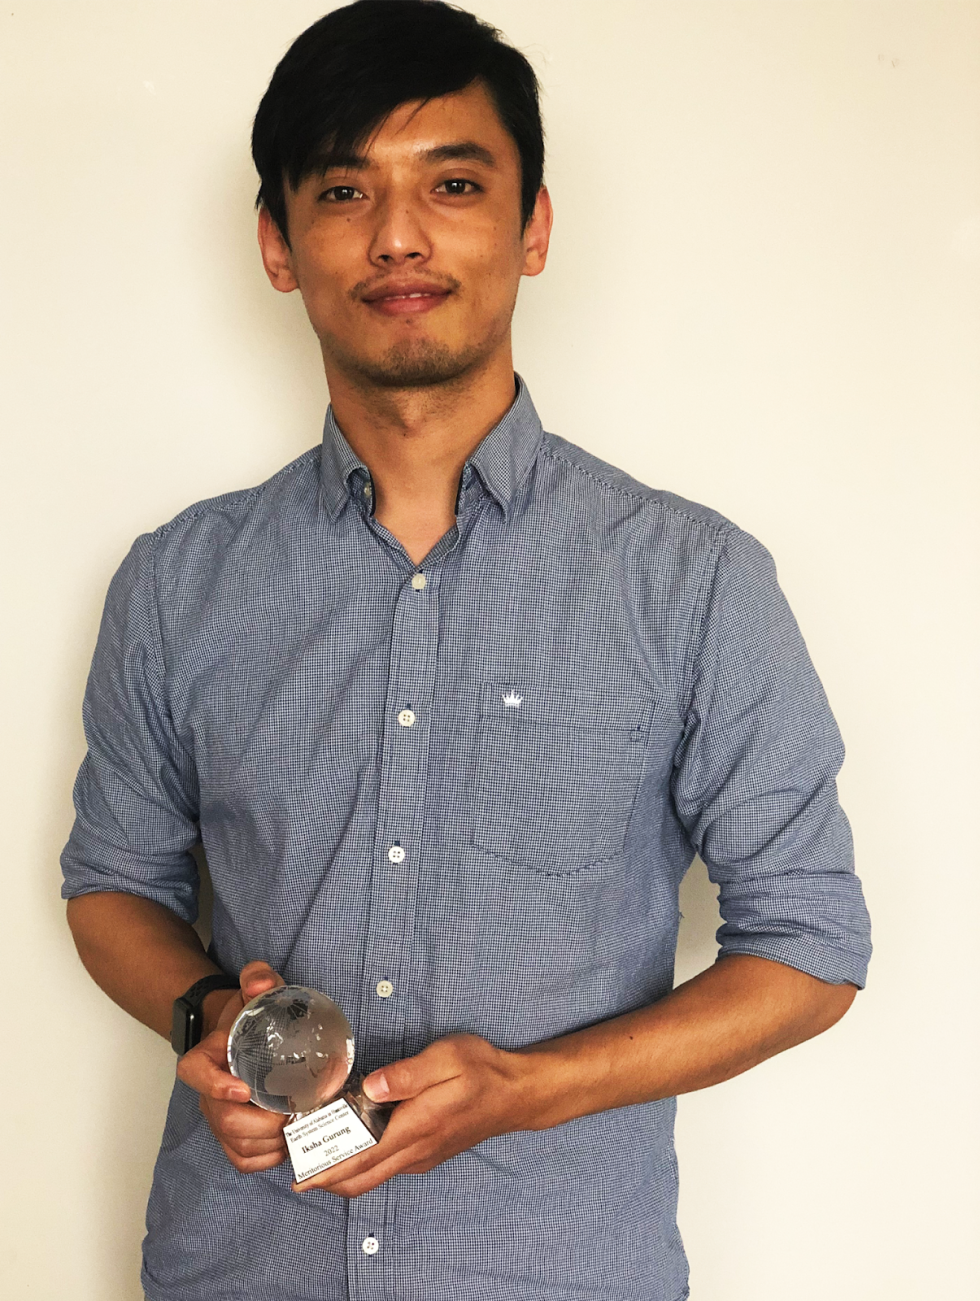 Iksha Gurung holds his UAH Earth Systems Science Center (ESSC) 2022 Meritorious Service Award, which is shaped like a small, clear globe.